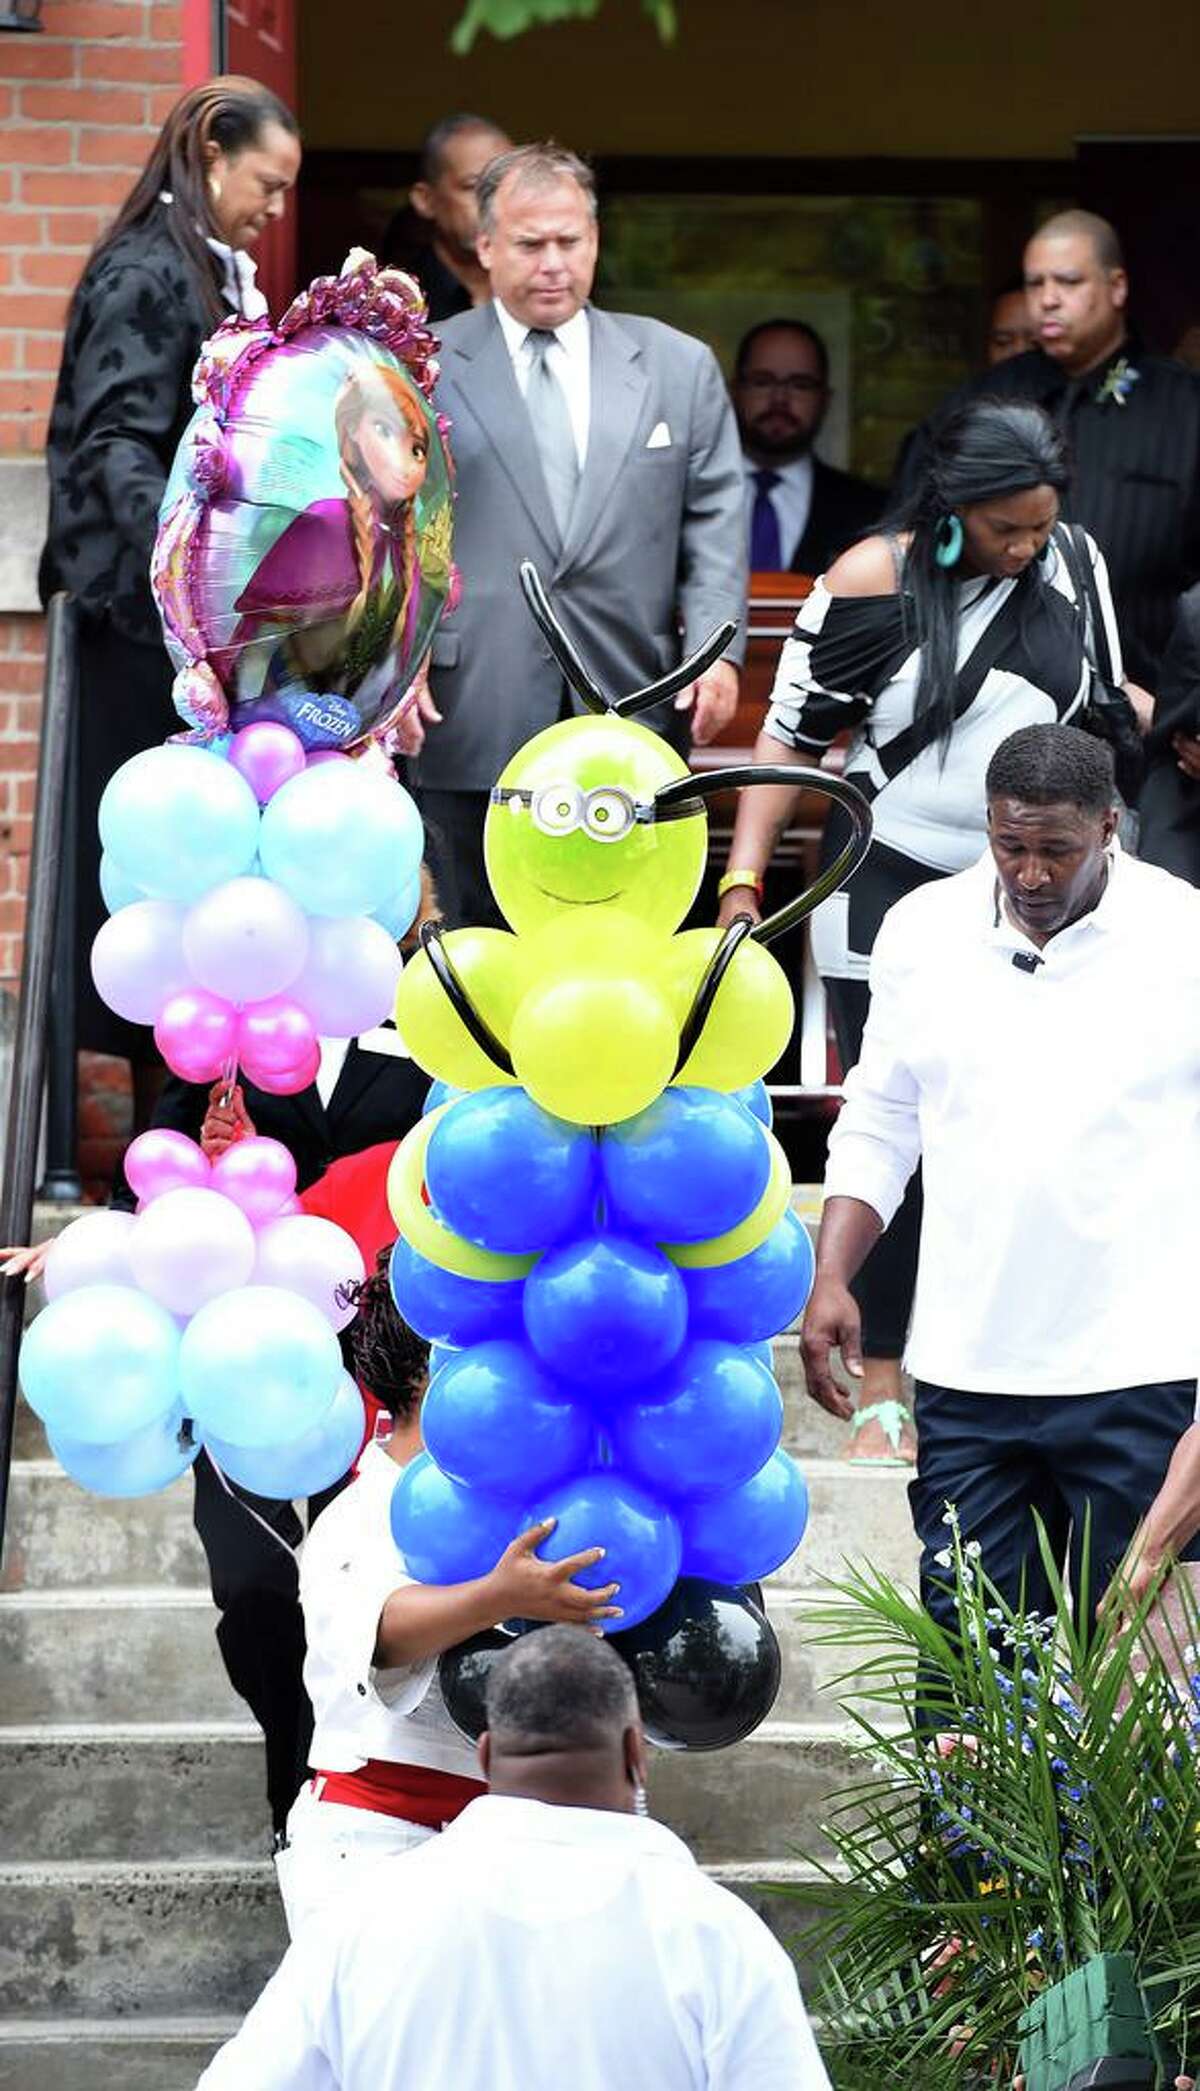 Balloon bouquets are carried for Aleisha Moore (left), 6, and Daaron Moore, 7, of East Haven, Connecticut, out of Varick Memorial A.M.E. Zion Church in New Haven, Connecticut, on Tuesday, June 16, 2015. Aleisha's balloons (left) were inspired by the movie, Frozen, and Daaron's have a Minions theme. The children's mother, LeRoya Moore, is detained on murder charges and wasn't allowed to attend the funeral.